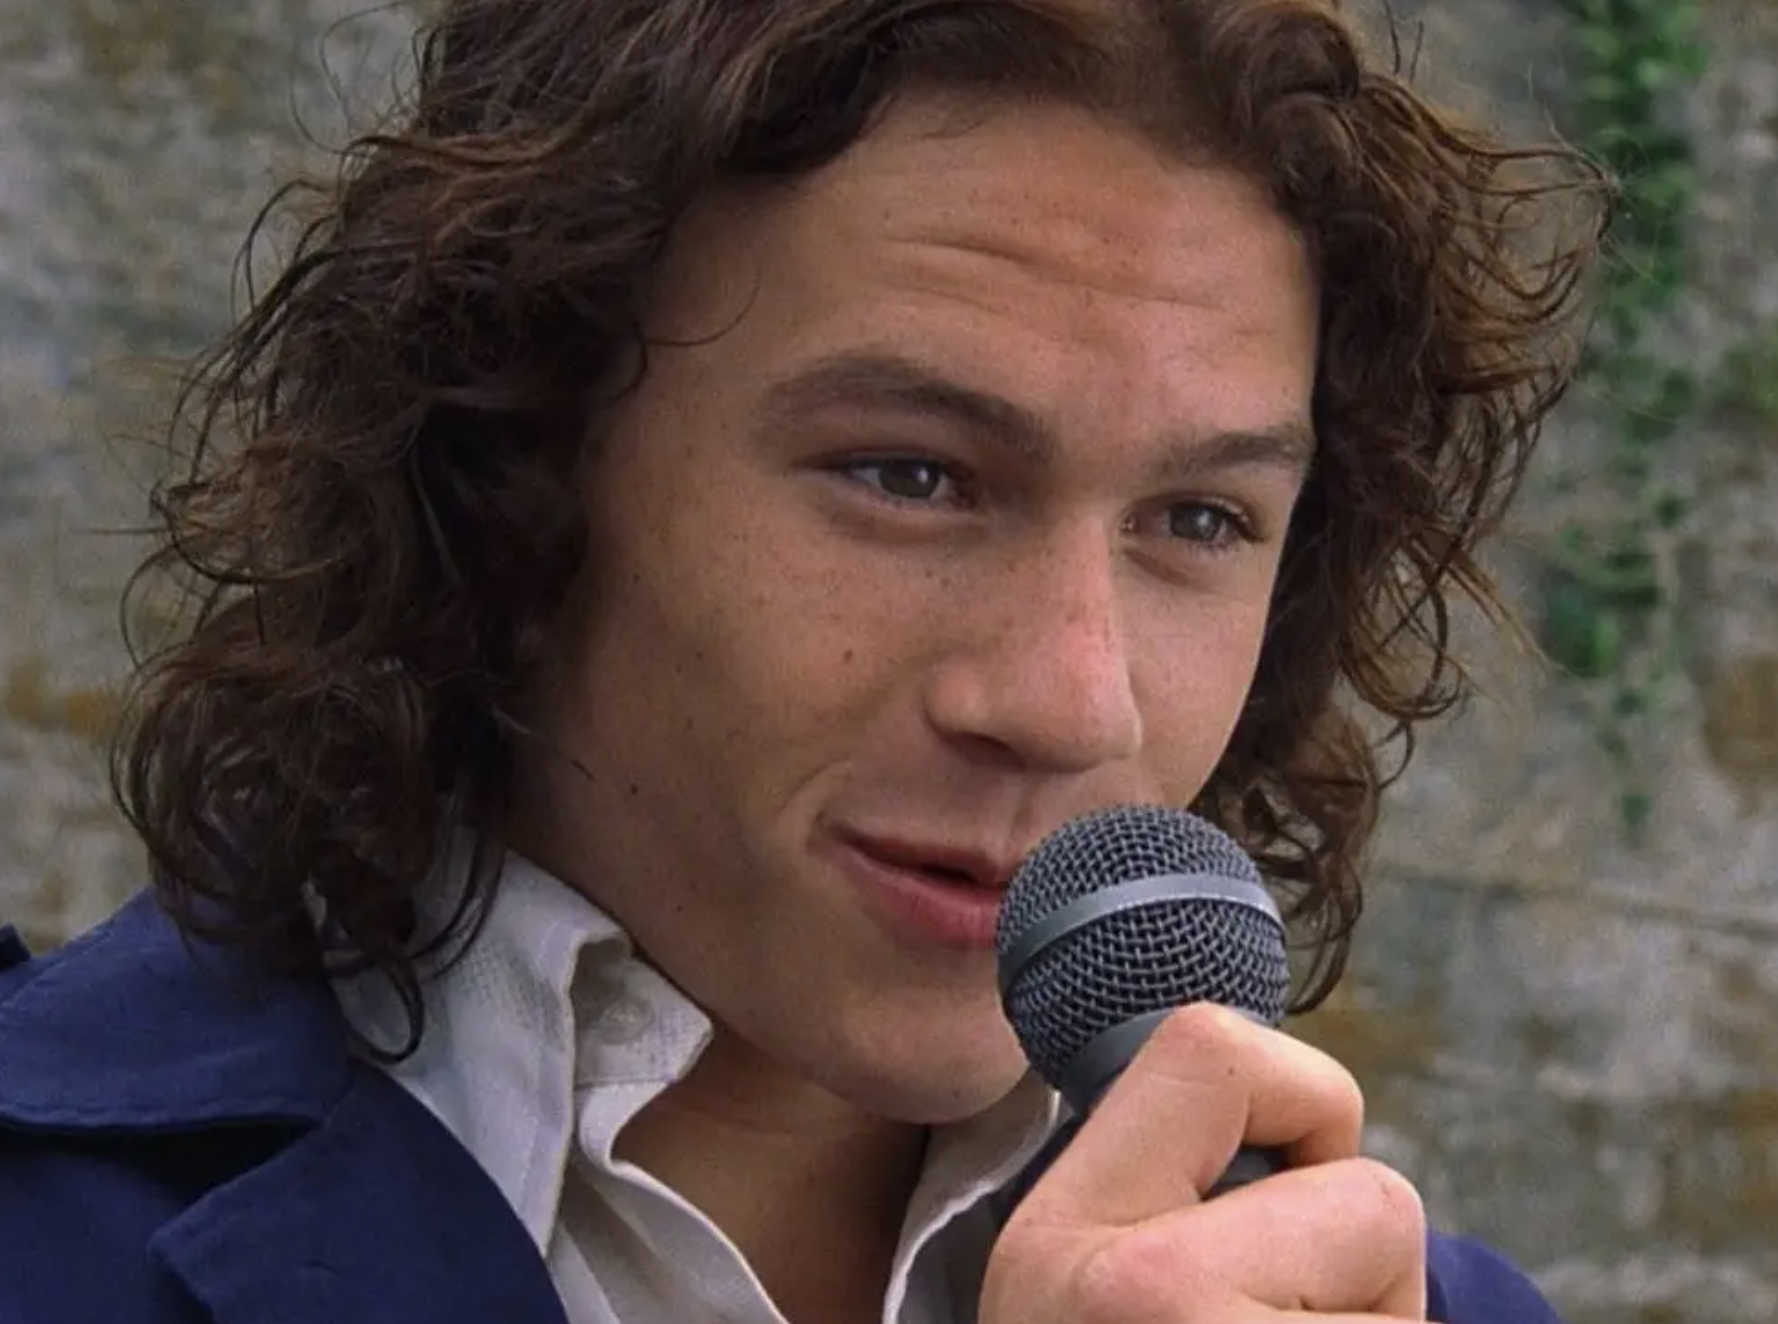 heath ledger singing into a microphone in a scene from 10 things i hate about you